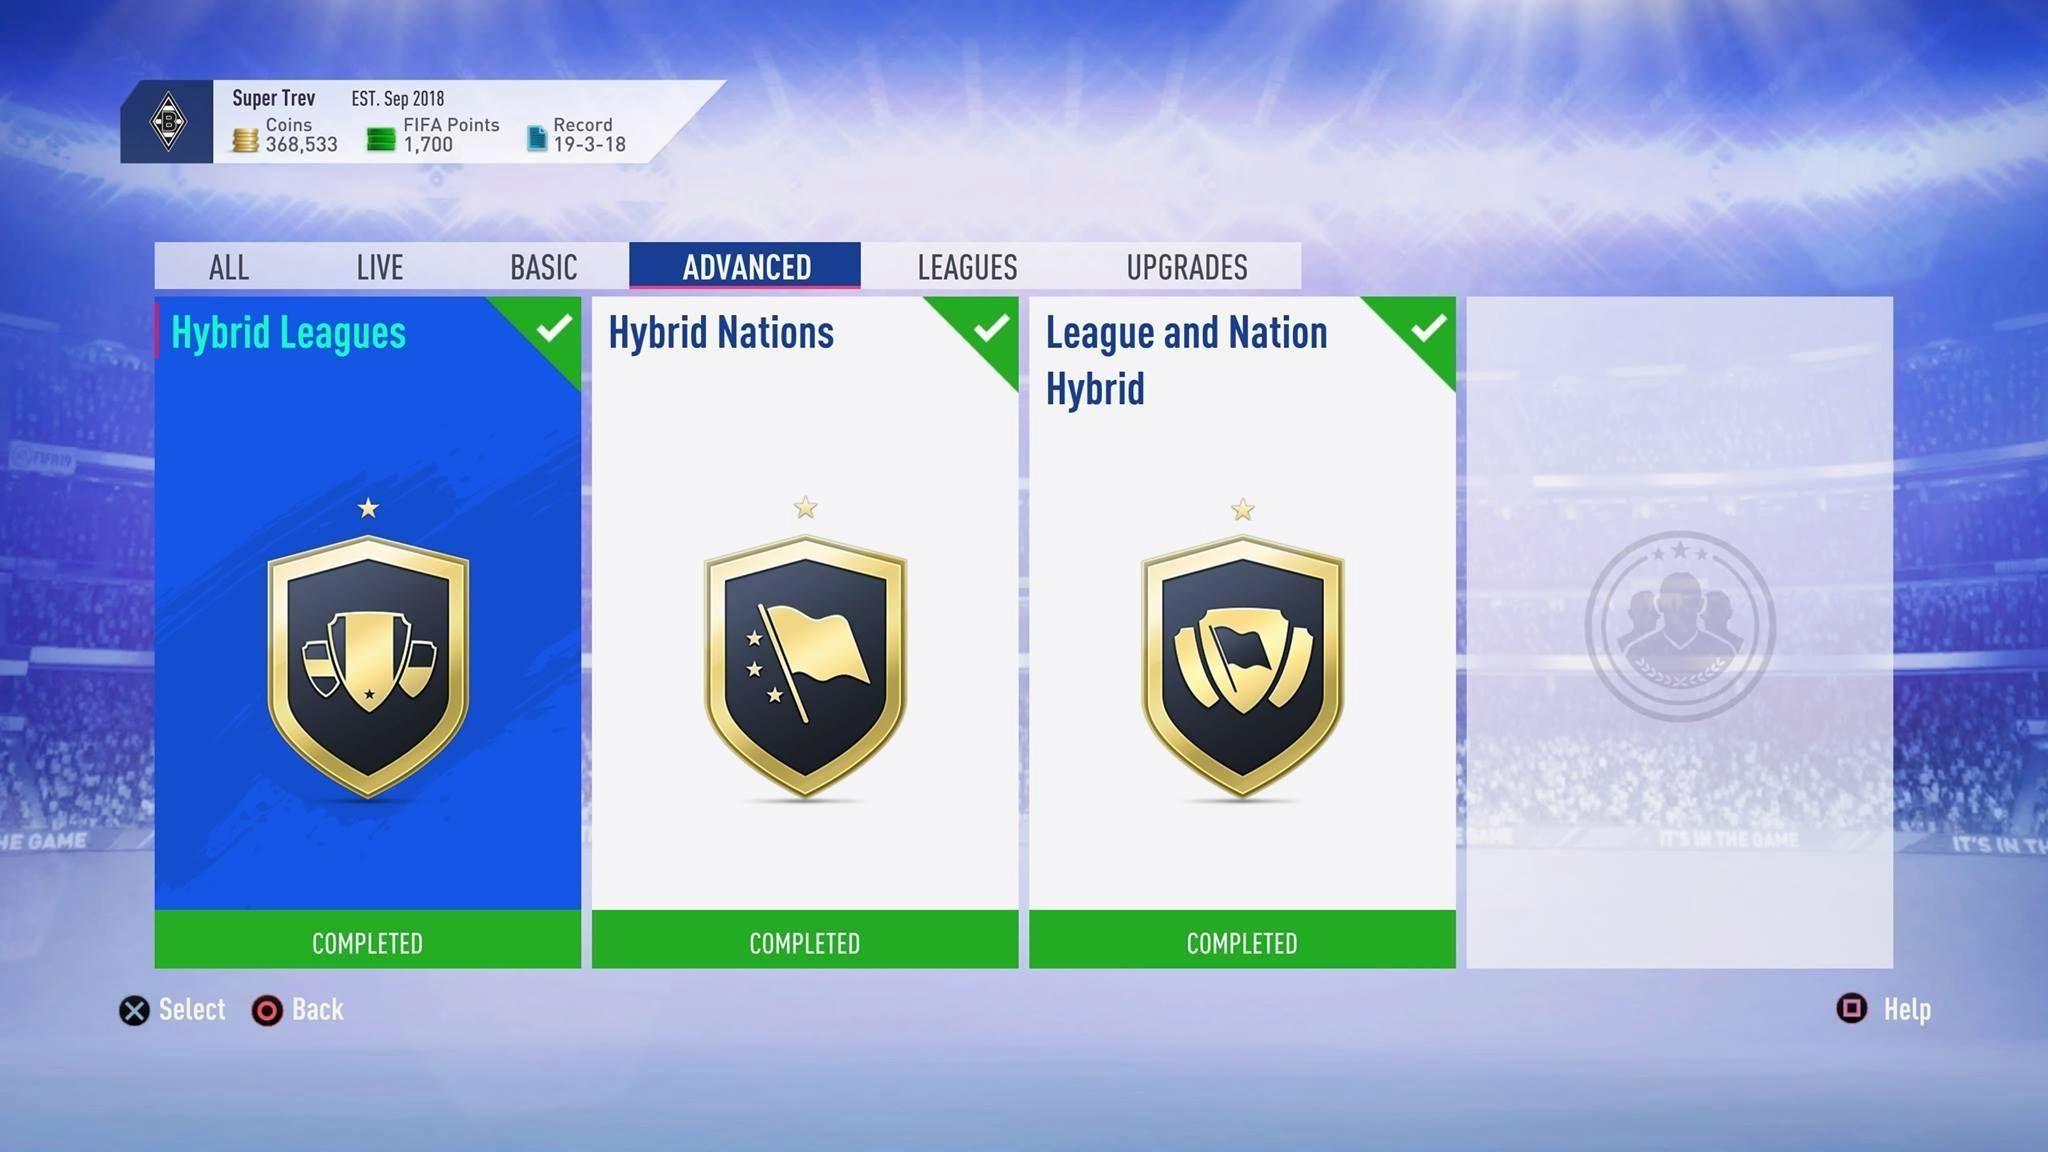 Est Squad Logo - FIFA 19 Ultimate Team tips: How to get coins